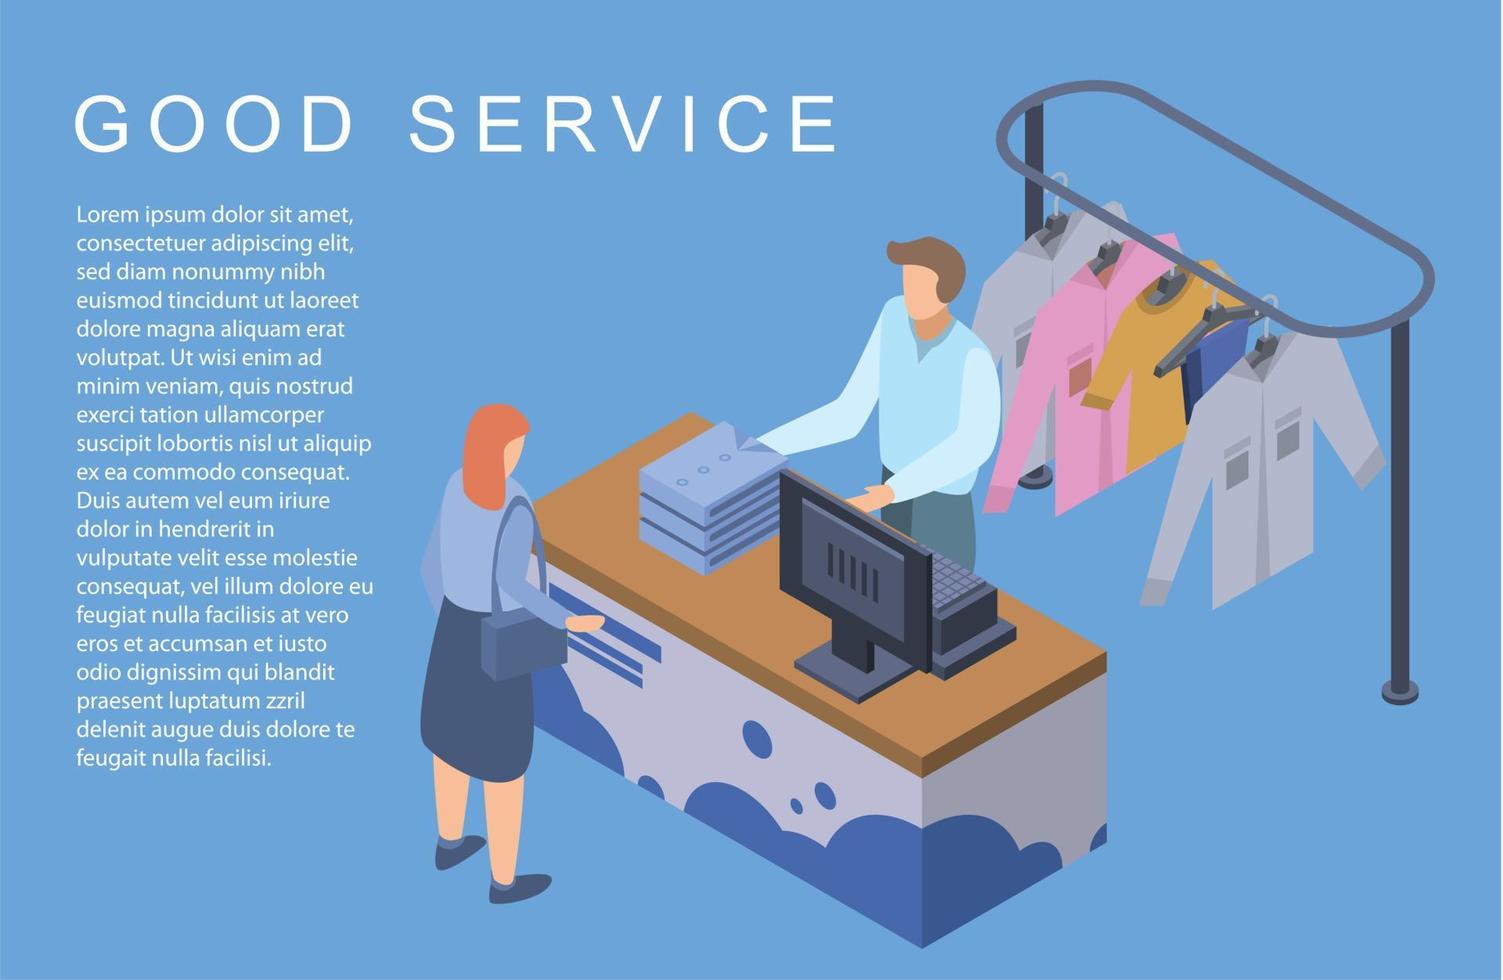 Good laundry service concept background, isometric style vector